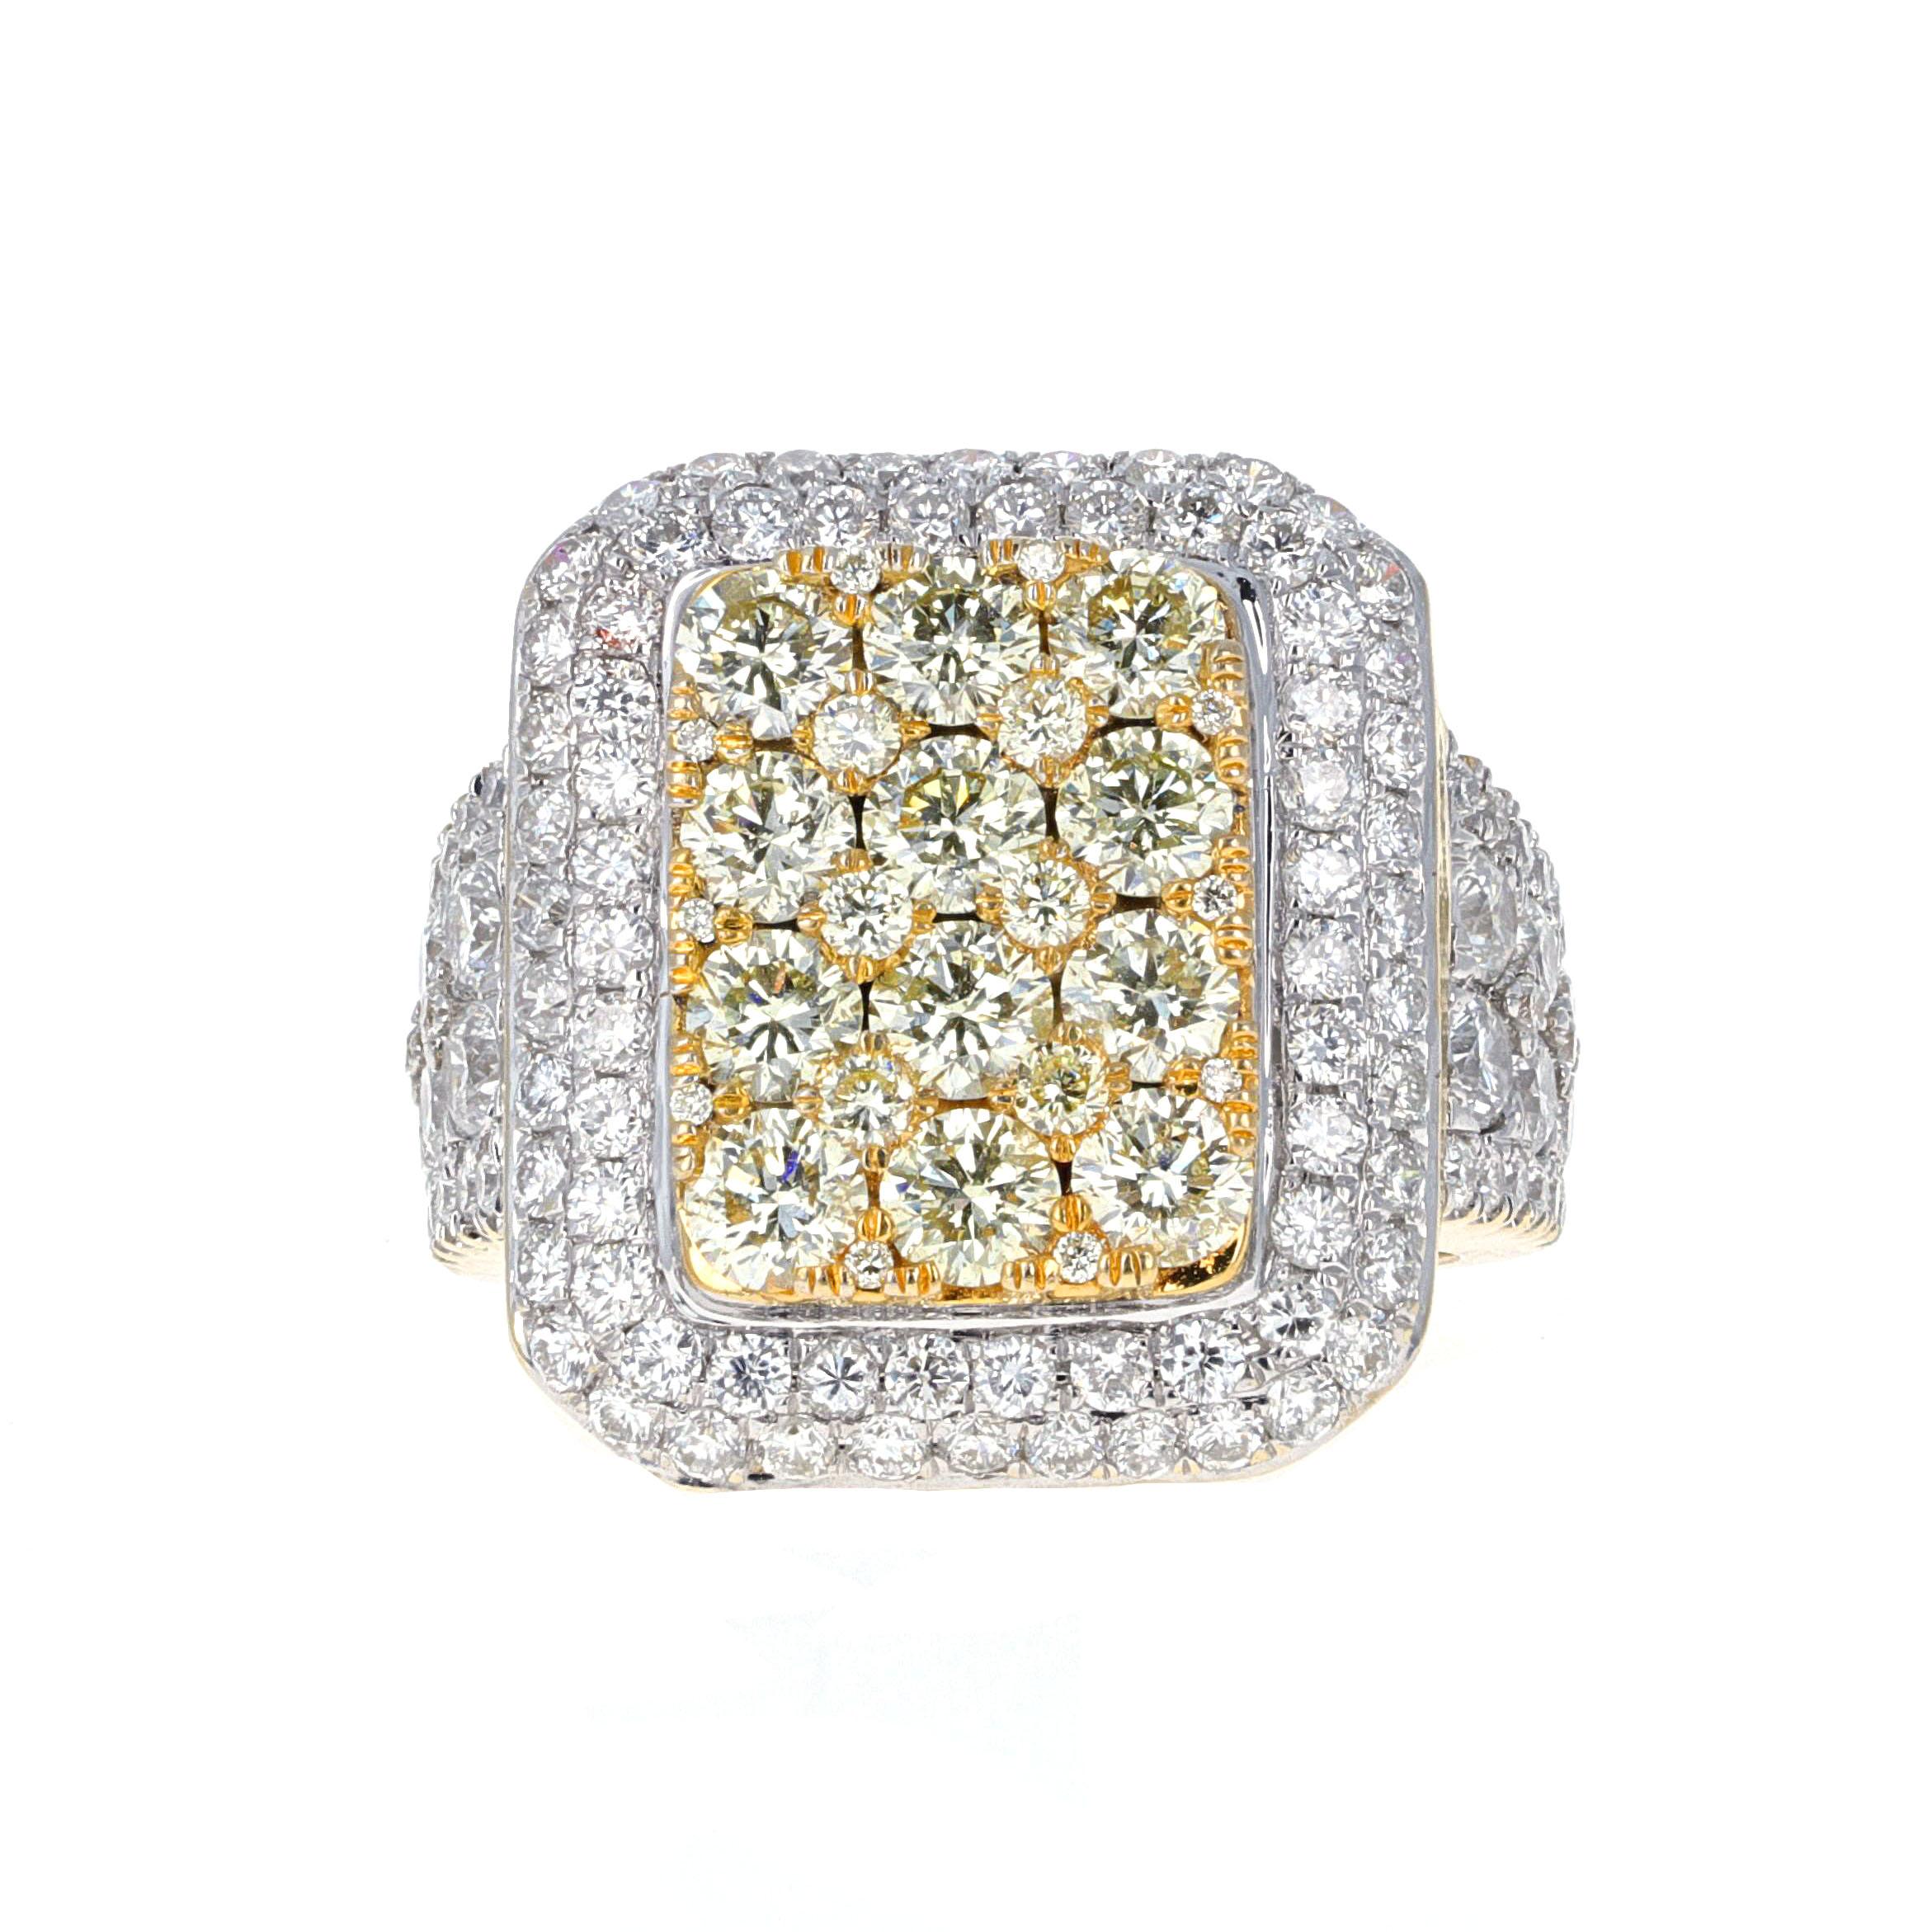 18-karat yellow gold and white gold diamond ring. The ring has 128 round white brilliant diamonds weighing an estimated 3.00 carats in total. 12 round brilliant yellow diamonds weigh an estimated 2.00 carats total. 
The ring sparkles in every